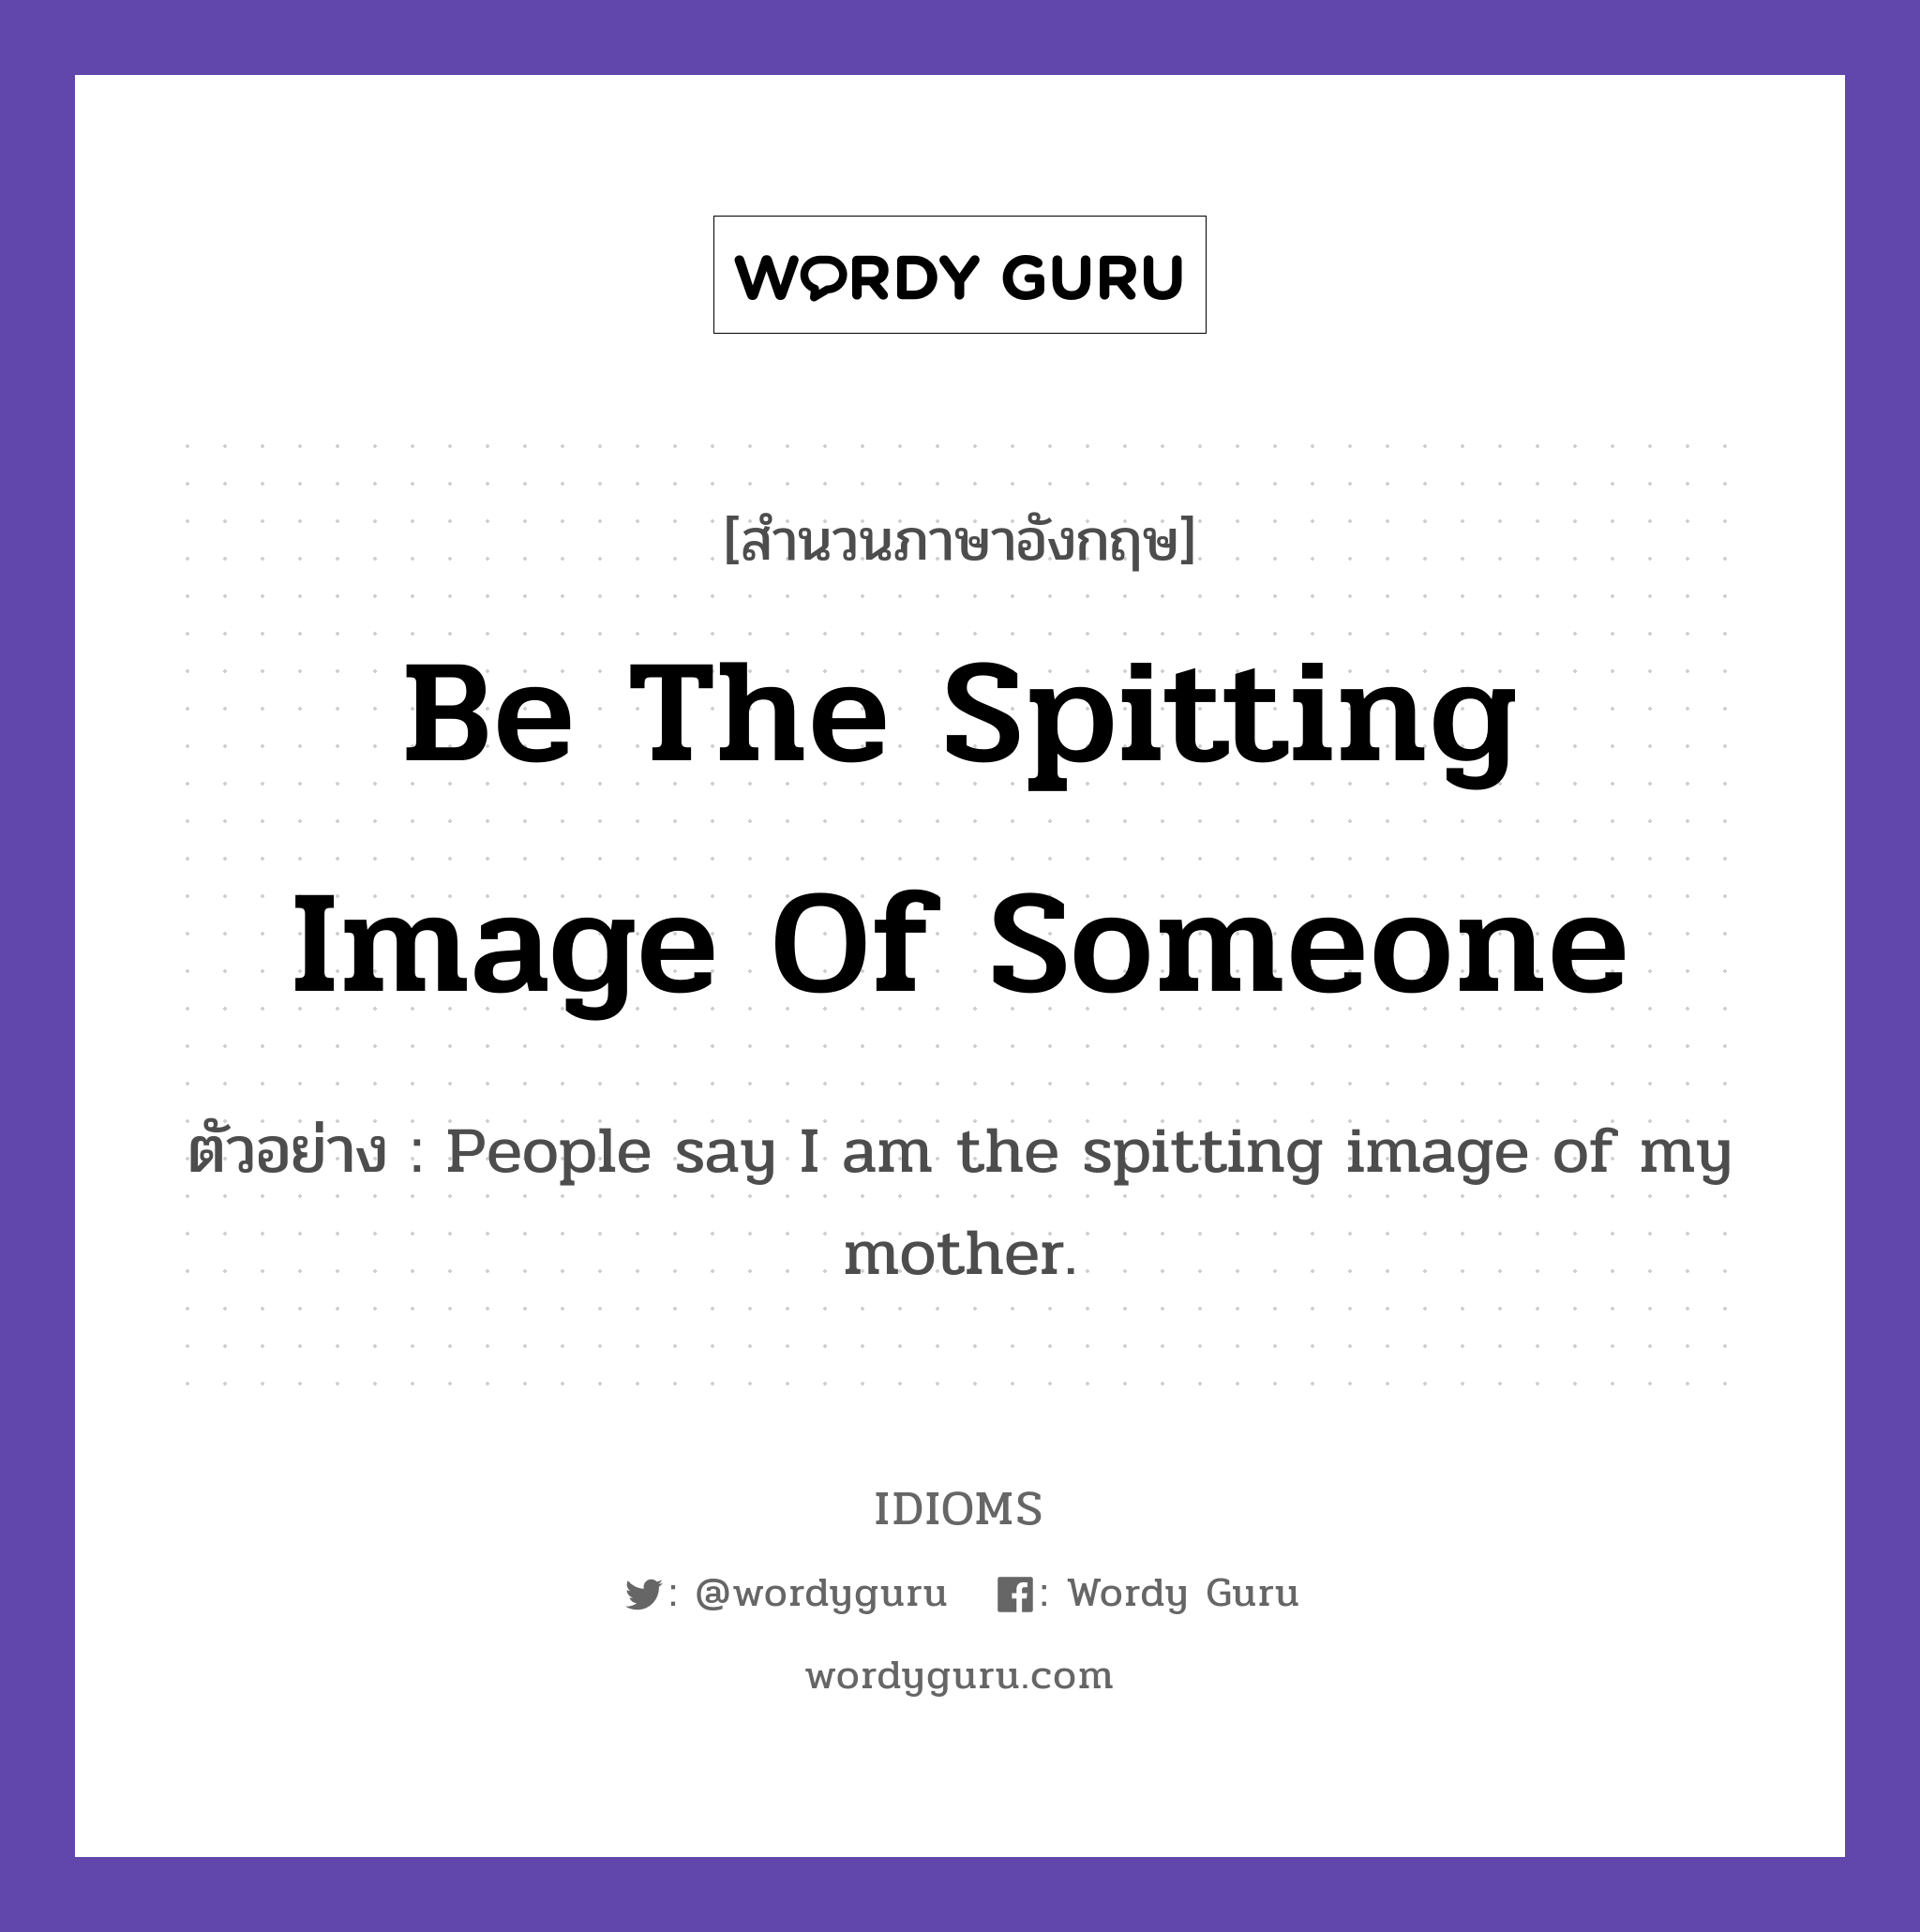 Be The Spitting Image Of Someone แปลว่า?, สำนวนภาษาอังกฤษ Be The Spitting Image Of Someone ตัวอย่าง People say I am the spitting image of my mother.